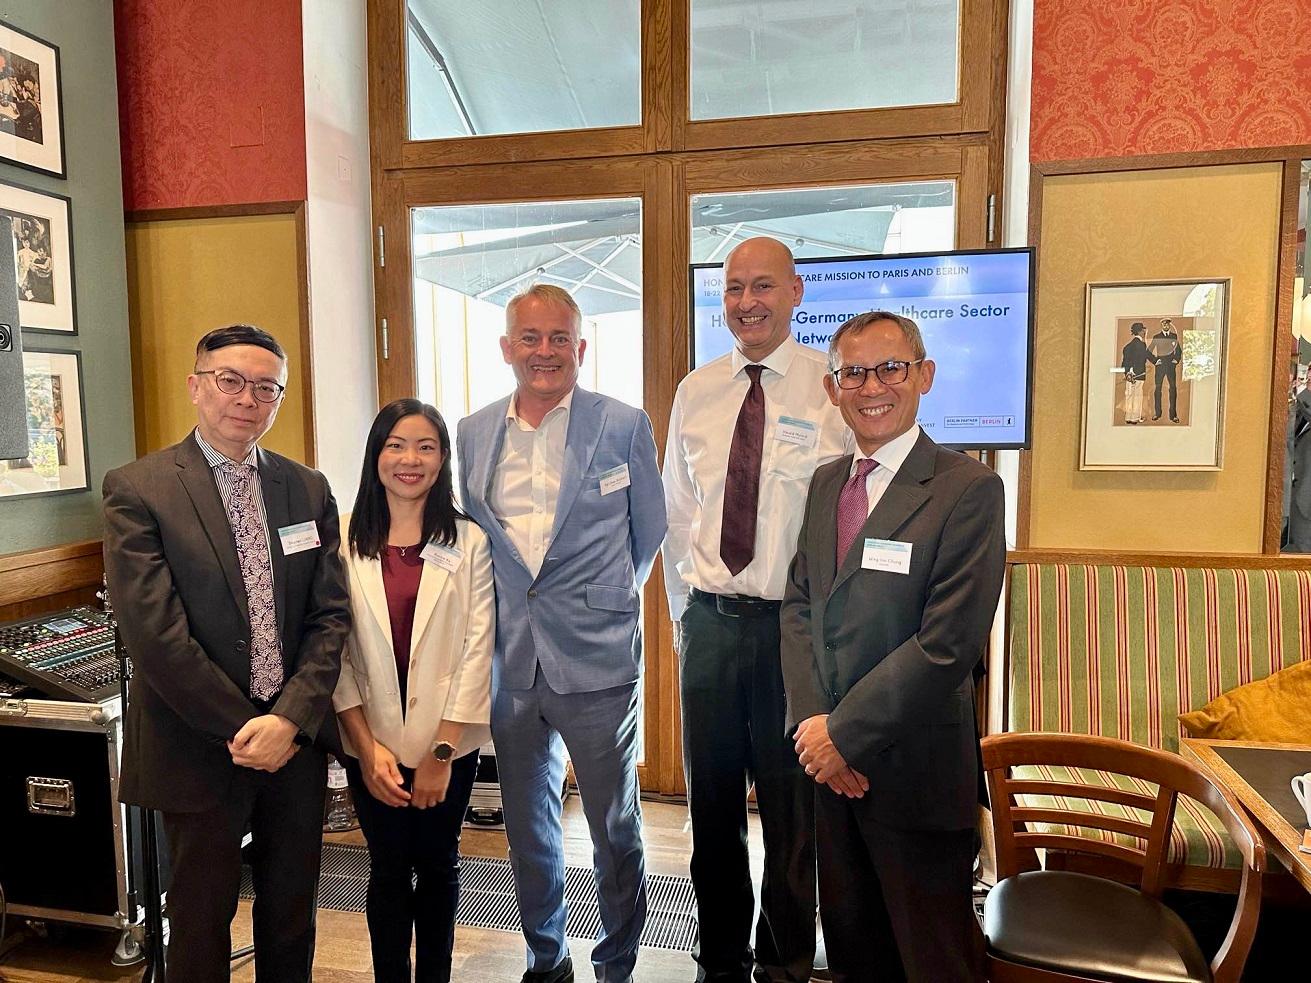 The Hong Kong Economic and Trade Office in Berlin (HKETO Berlin) supported a networking lunch organised by the Hong Kong Trade Development Council (HKTDC) on September 21 (Berlin time). Speakers at the Healthcare Sector Networking Lunch were (from left): the Assistant Executive Director, HKTDC, Mr Stephen Liang; the Acting Director, HKETO Berlin, Miss Bonnie Ka; the Head of Division Healthcare, Industry, Infrastructure, Berlin Partner, Dr Kai Uwe Bindseil; 
Senior Manager Investors Relations, Department Chemicals and Heathcare, Germany Trade and Invest, Mr Harald Mylord, and the Head, Business and Talent Attraction/Investment Promotion of InvestHK in Berlin, Dr Chung Wing-hin.
